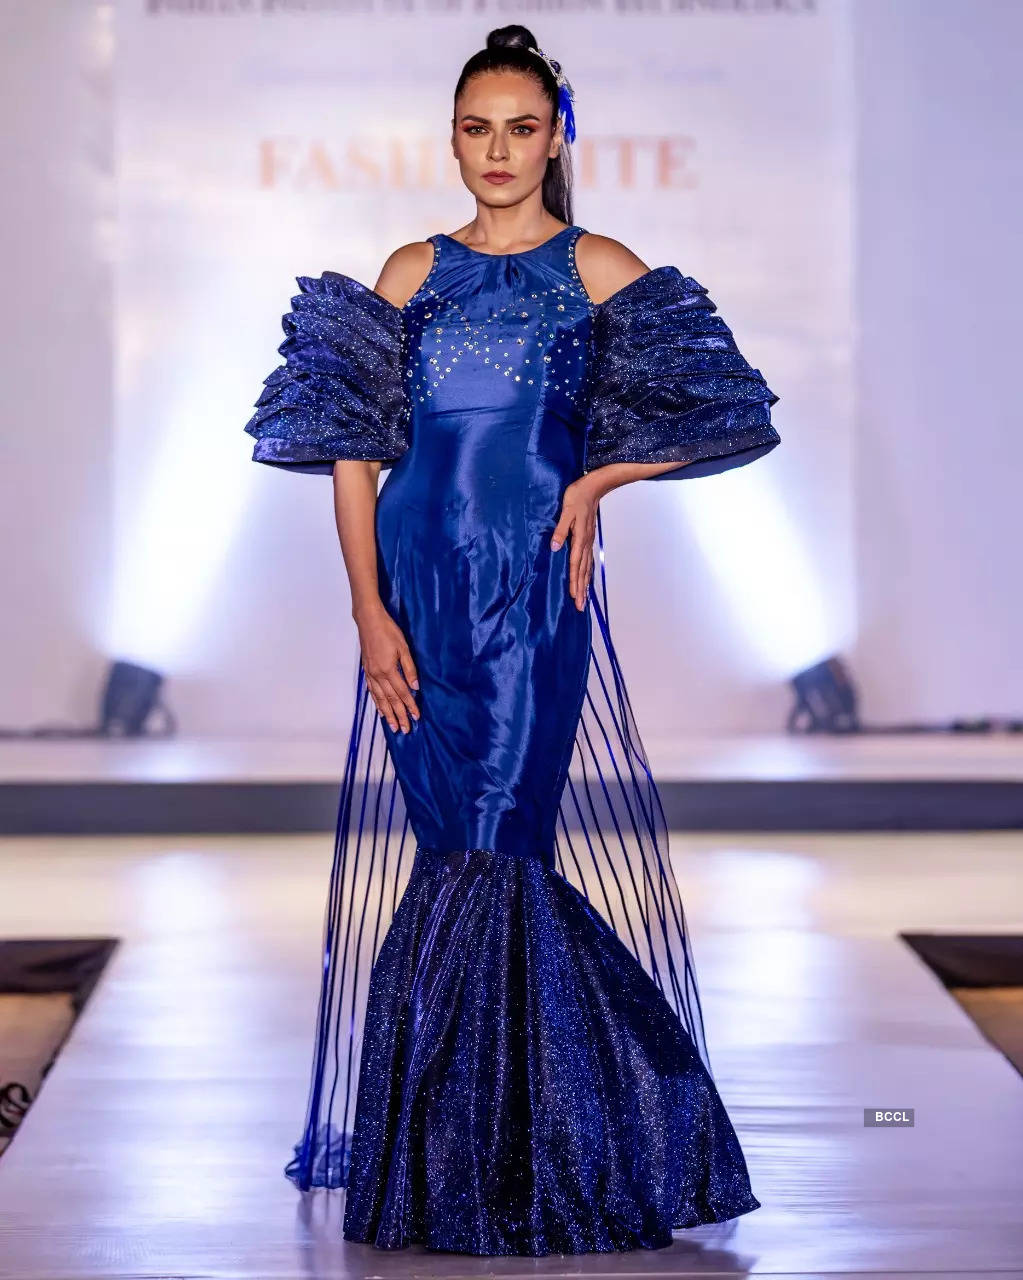 Indian Institute Of Fashion Technology Concludes Fashionite 2022